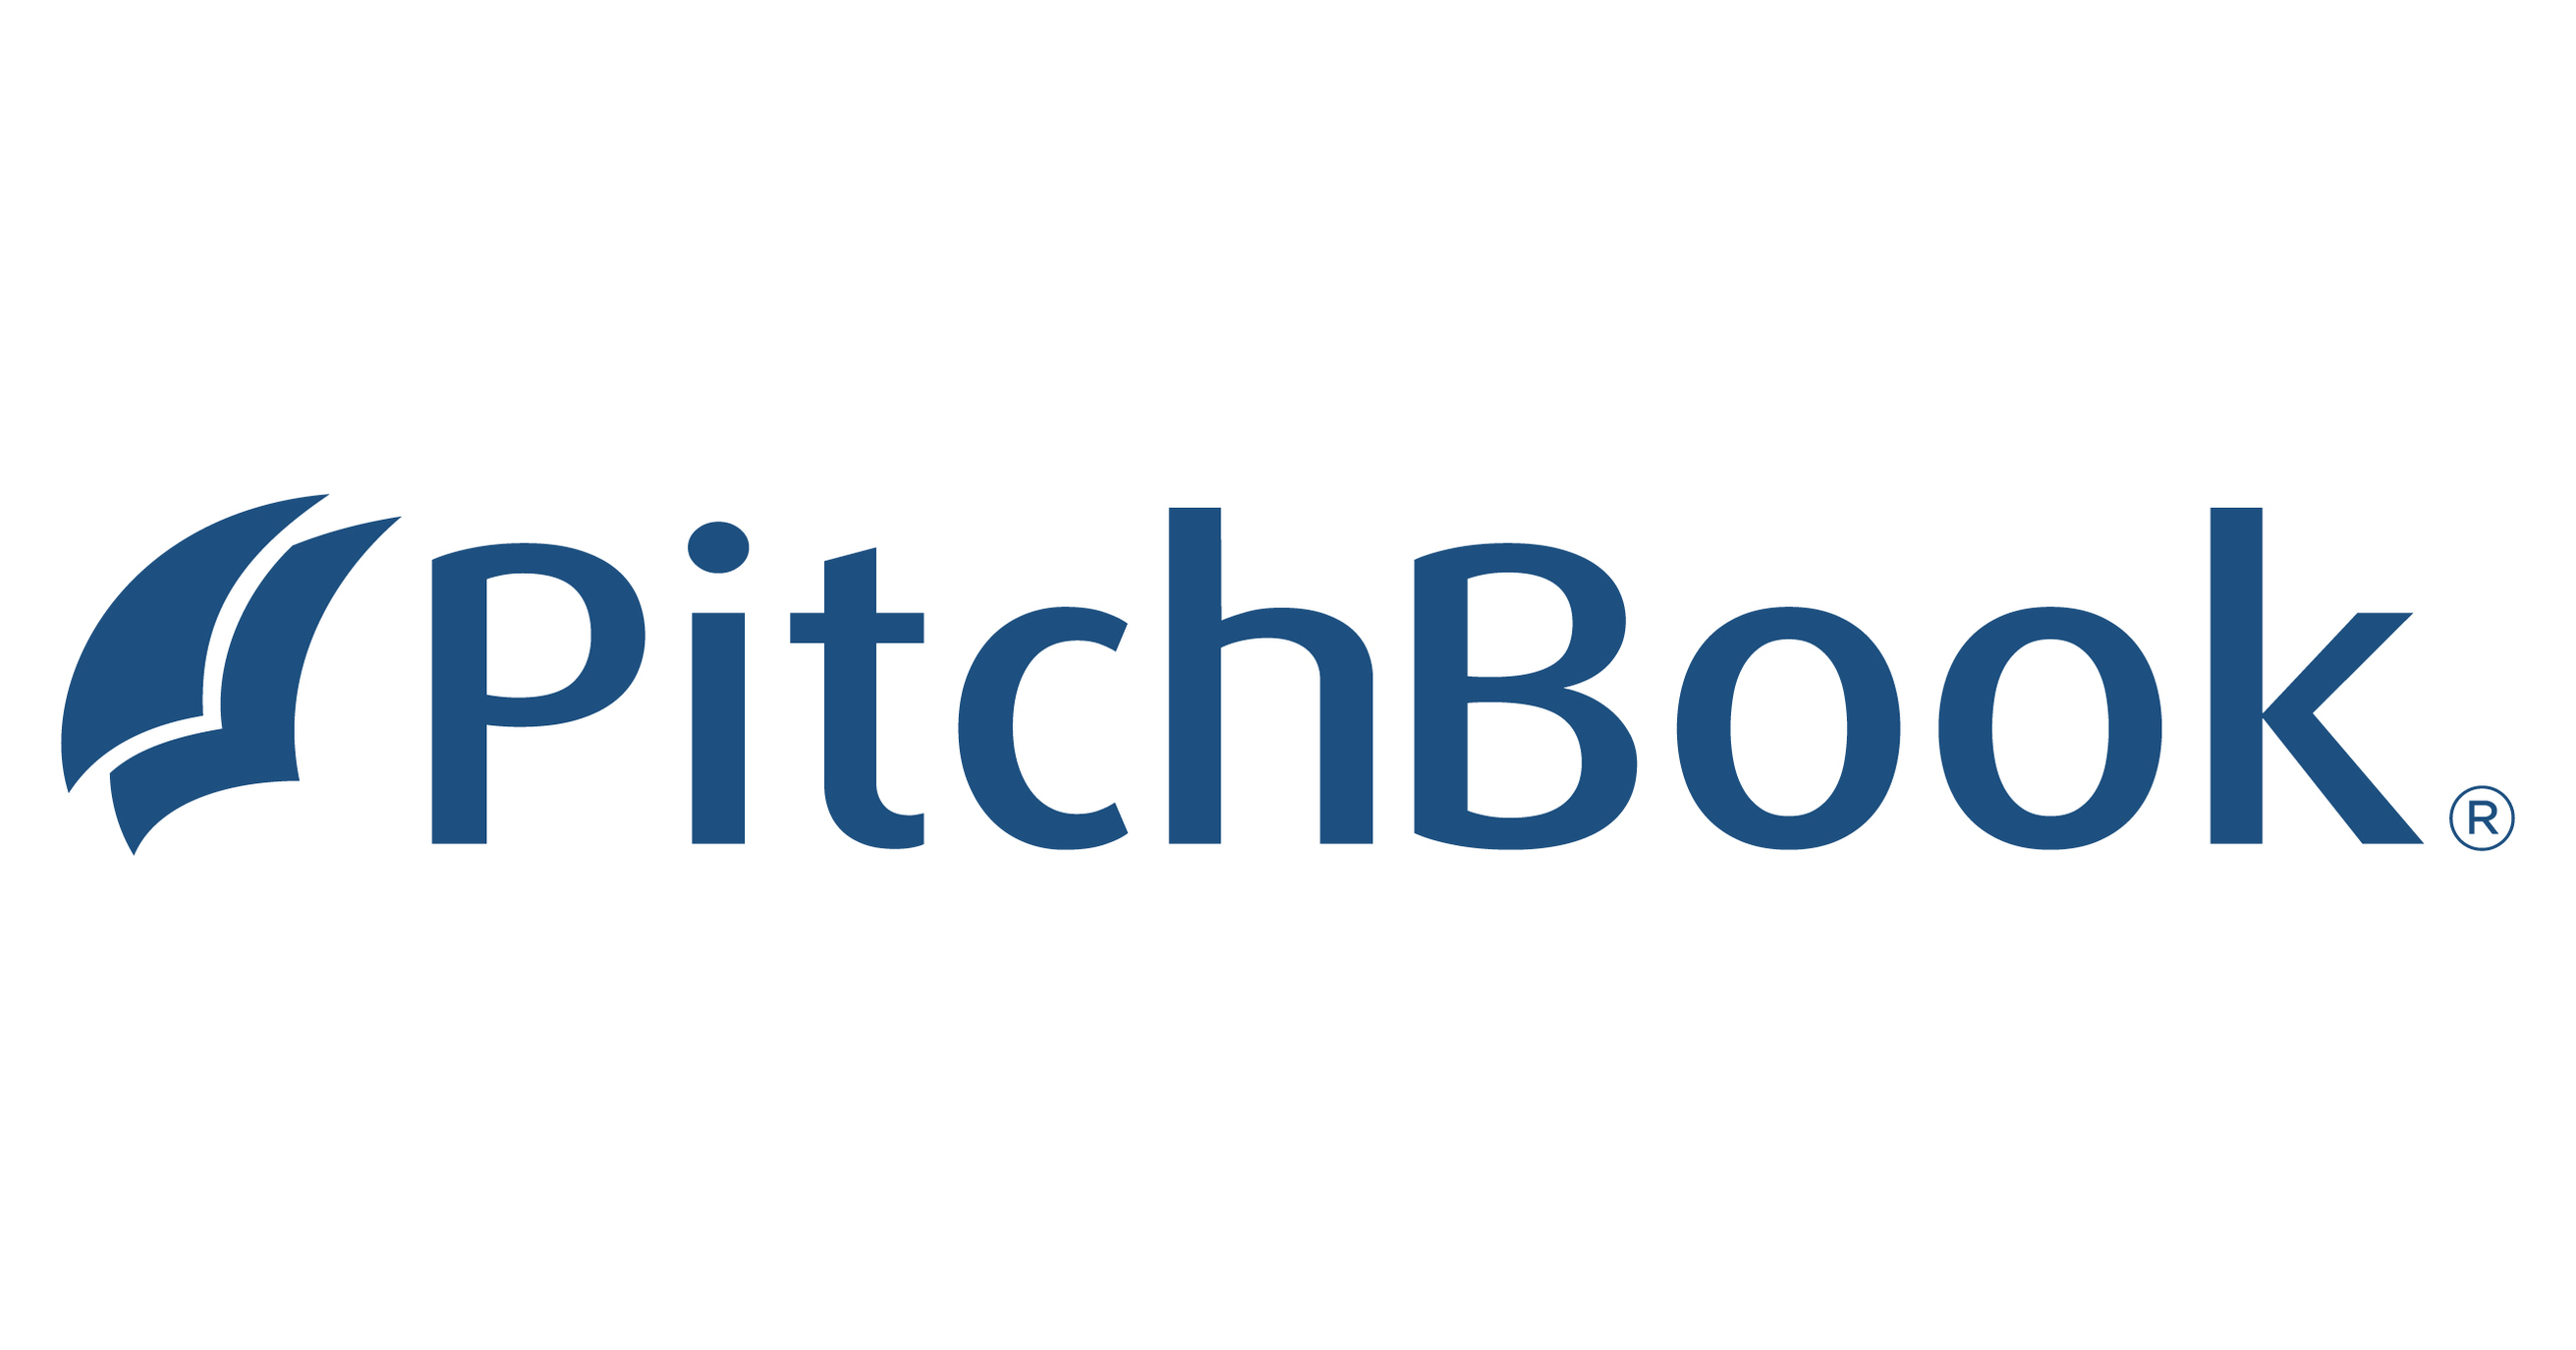 PitchBook Ranked 10th on LinkedIn’s 2022 Top Companies in Financial Services